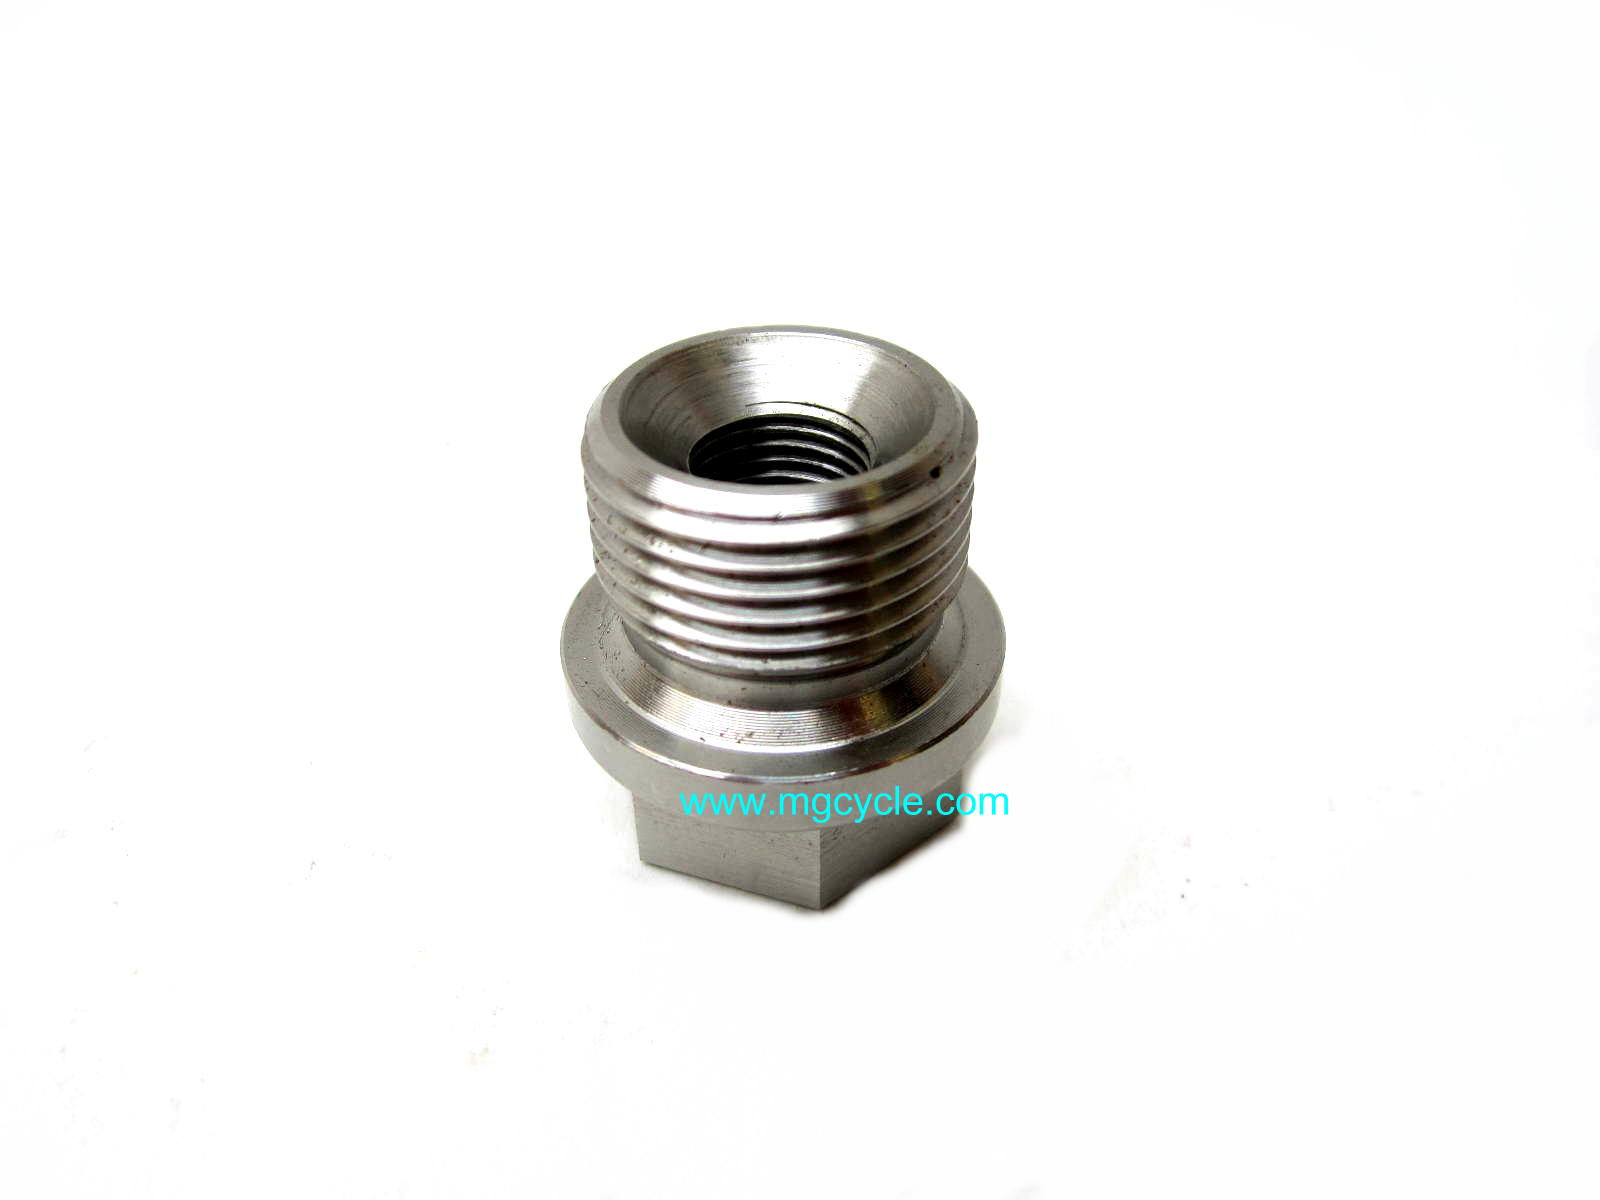 Oil drain plug, stainless steel, hex head, with hole